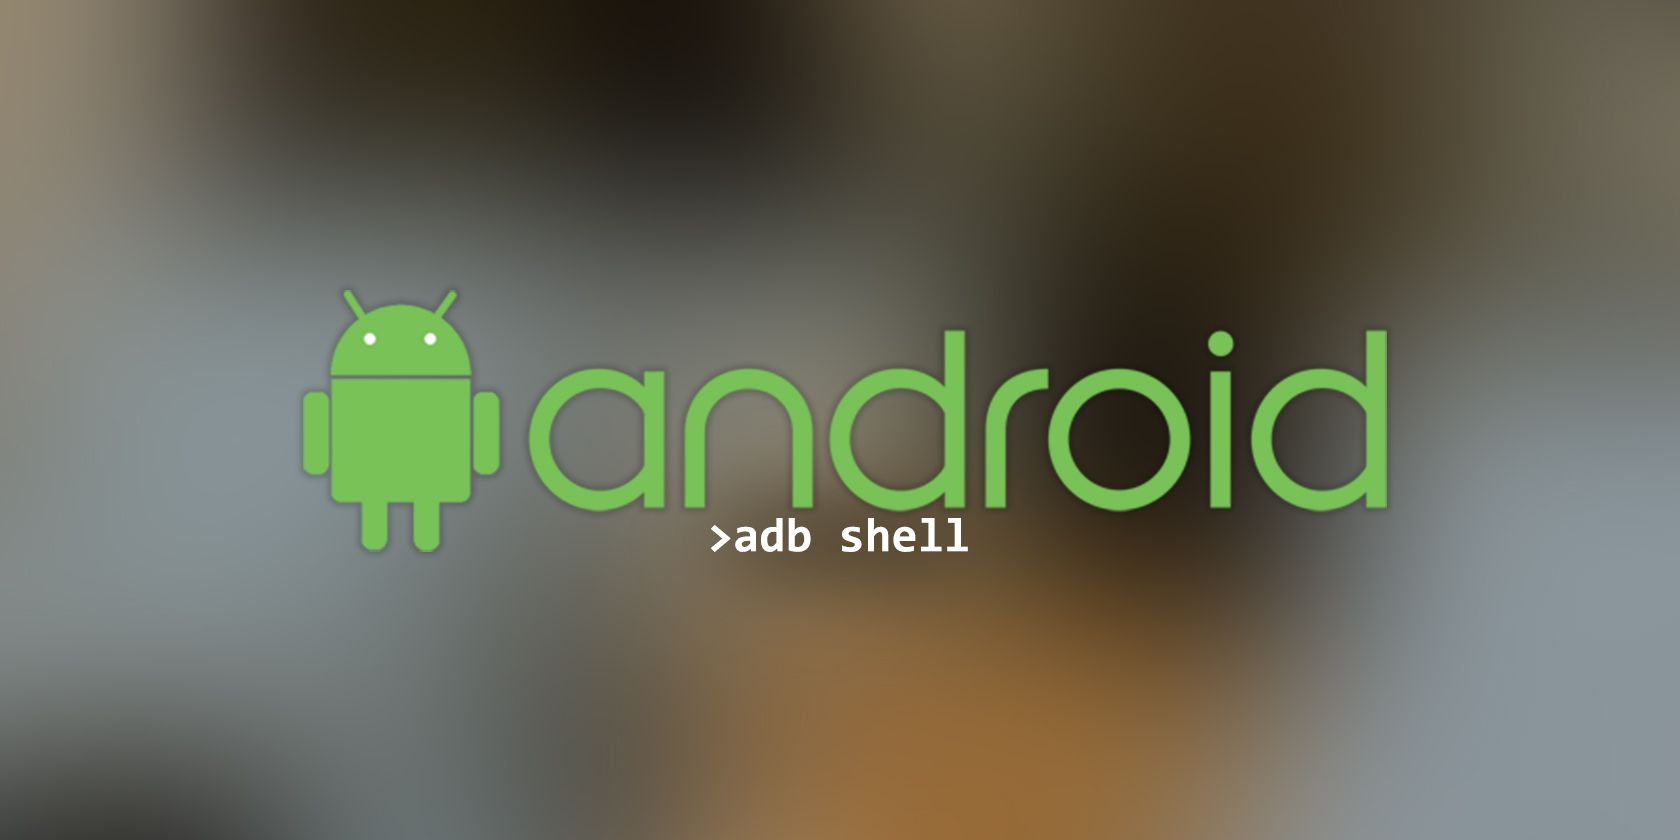 Android logo on a blurred background